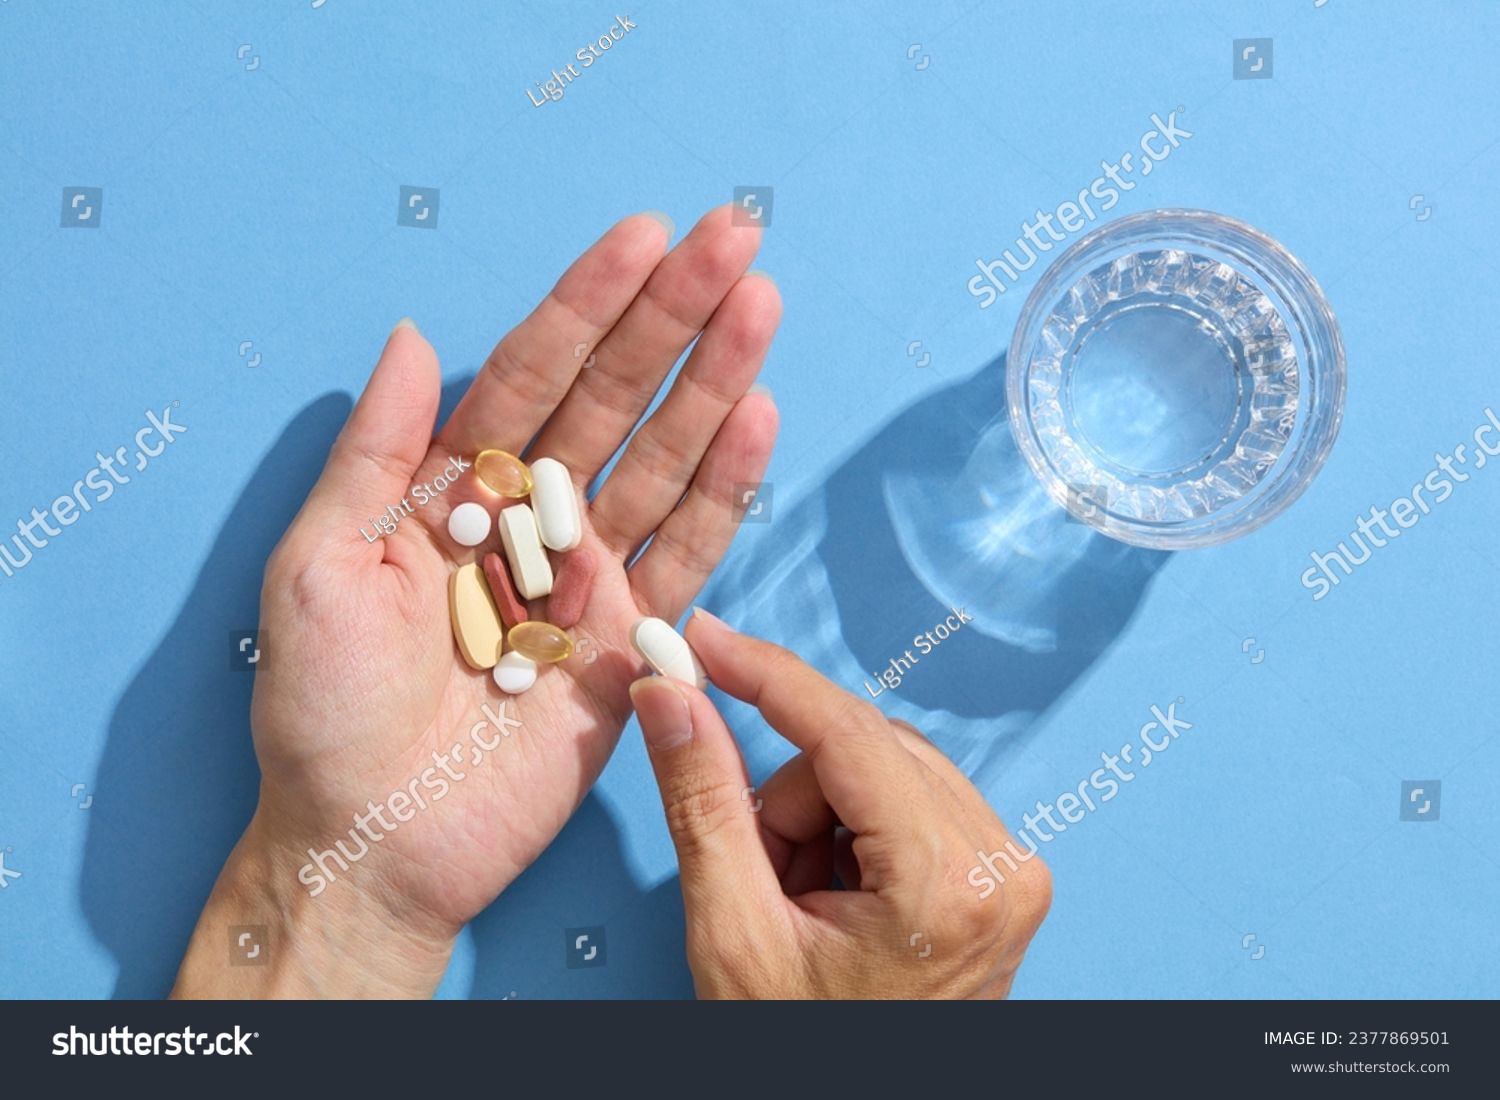 Close up of a woman's hand holding multiple pills with a glass of water. Taking medication for headache relief, pain management, drinking water from the glass. The concept of healthcare, medicine. #2377869501